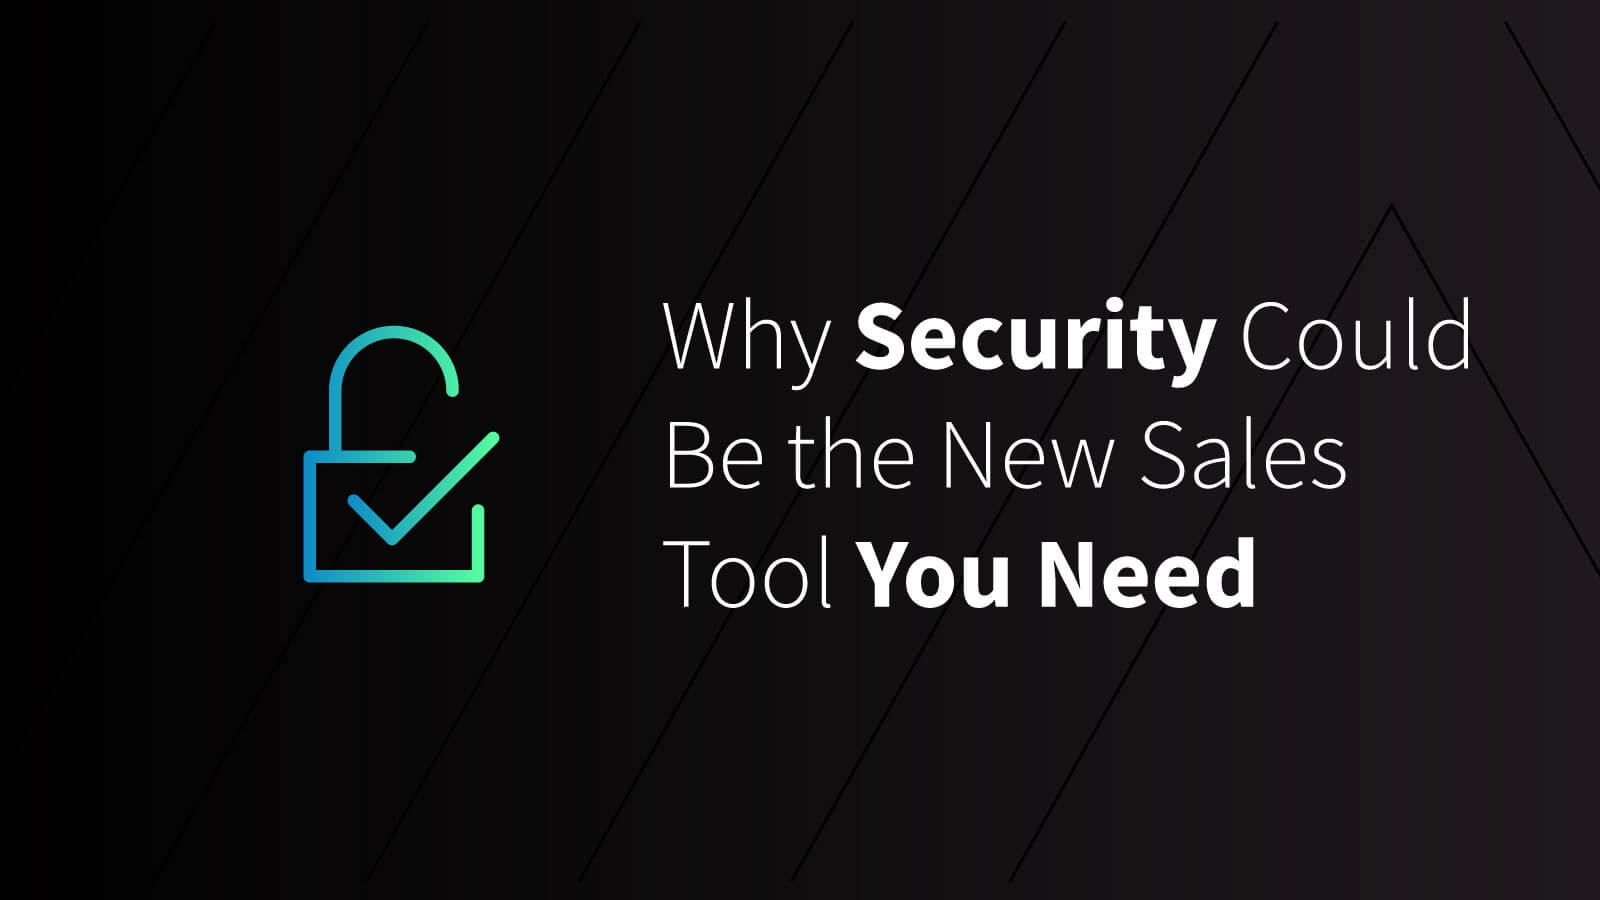 Why Security Could Be the New Sales Tool You Need